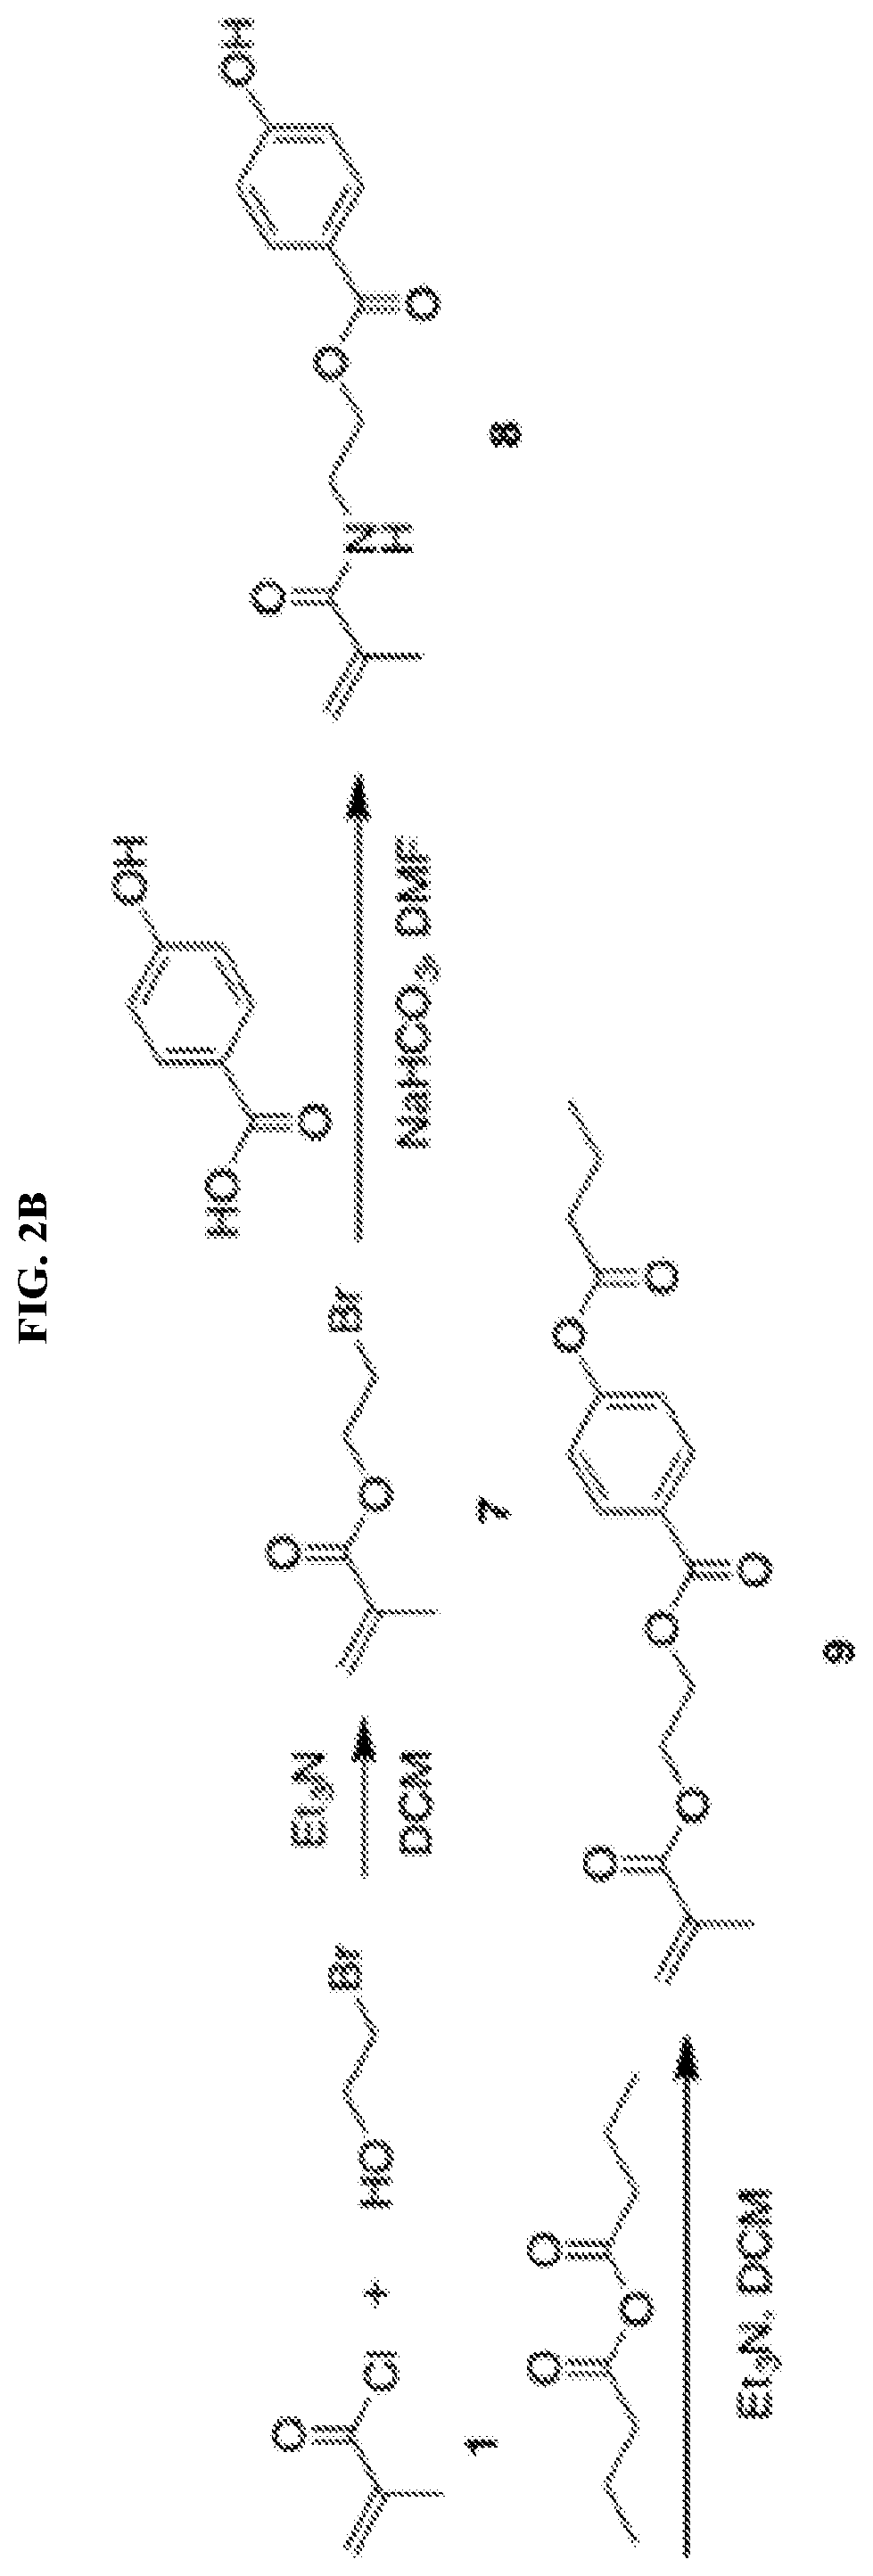 Polymer materials for delivery of short chain fatty acids to the intestine for applications in human health and treatment of disease